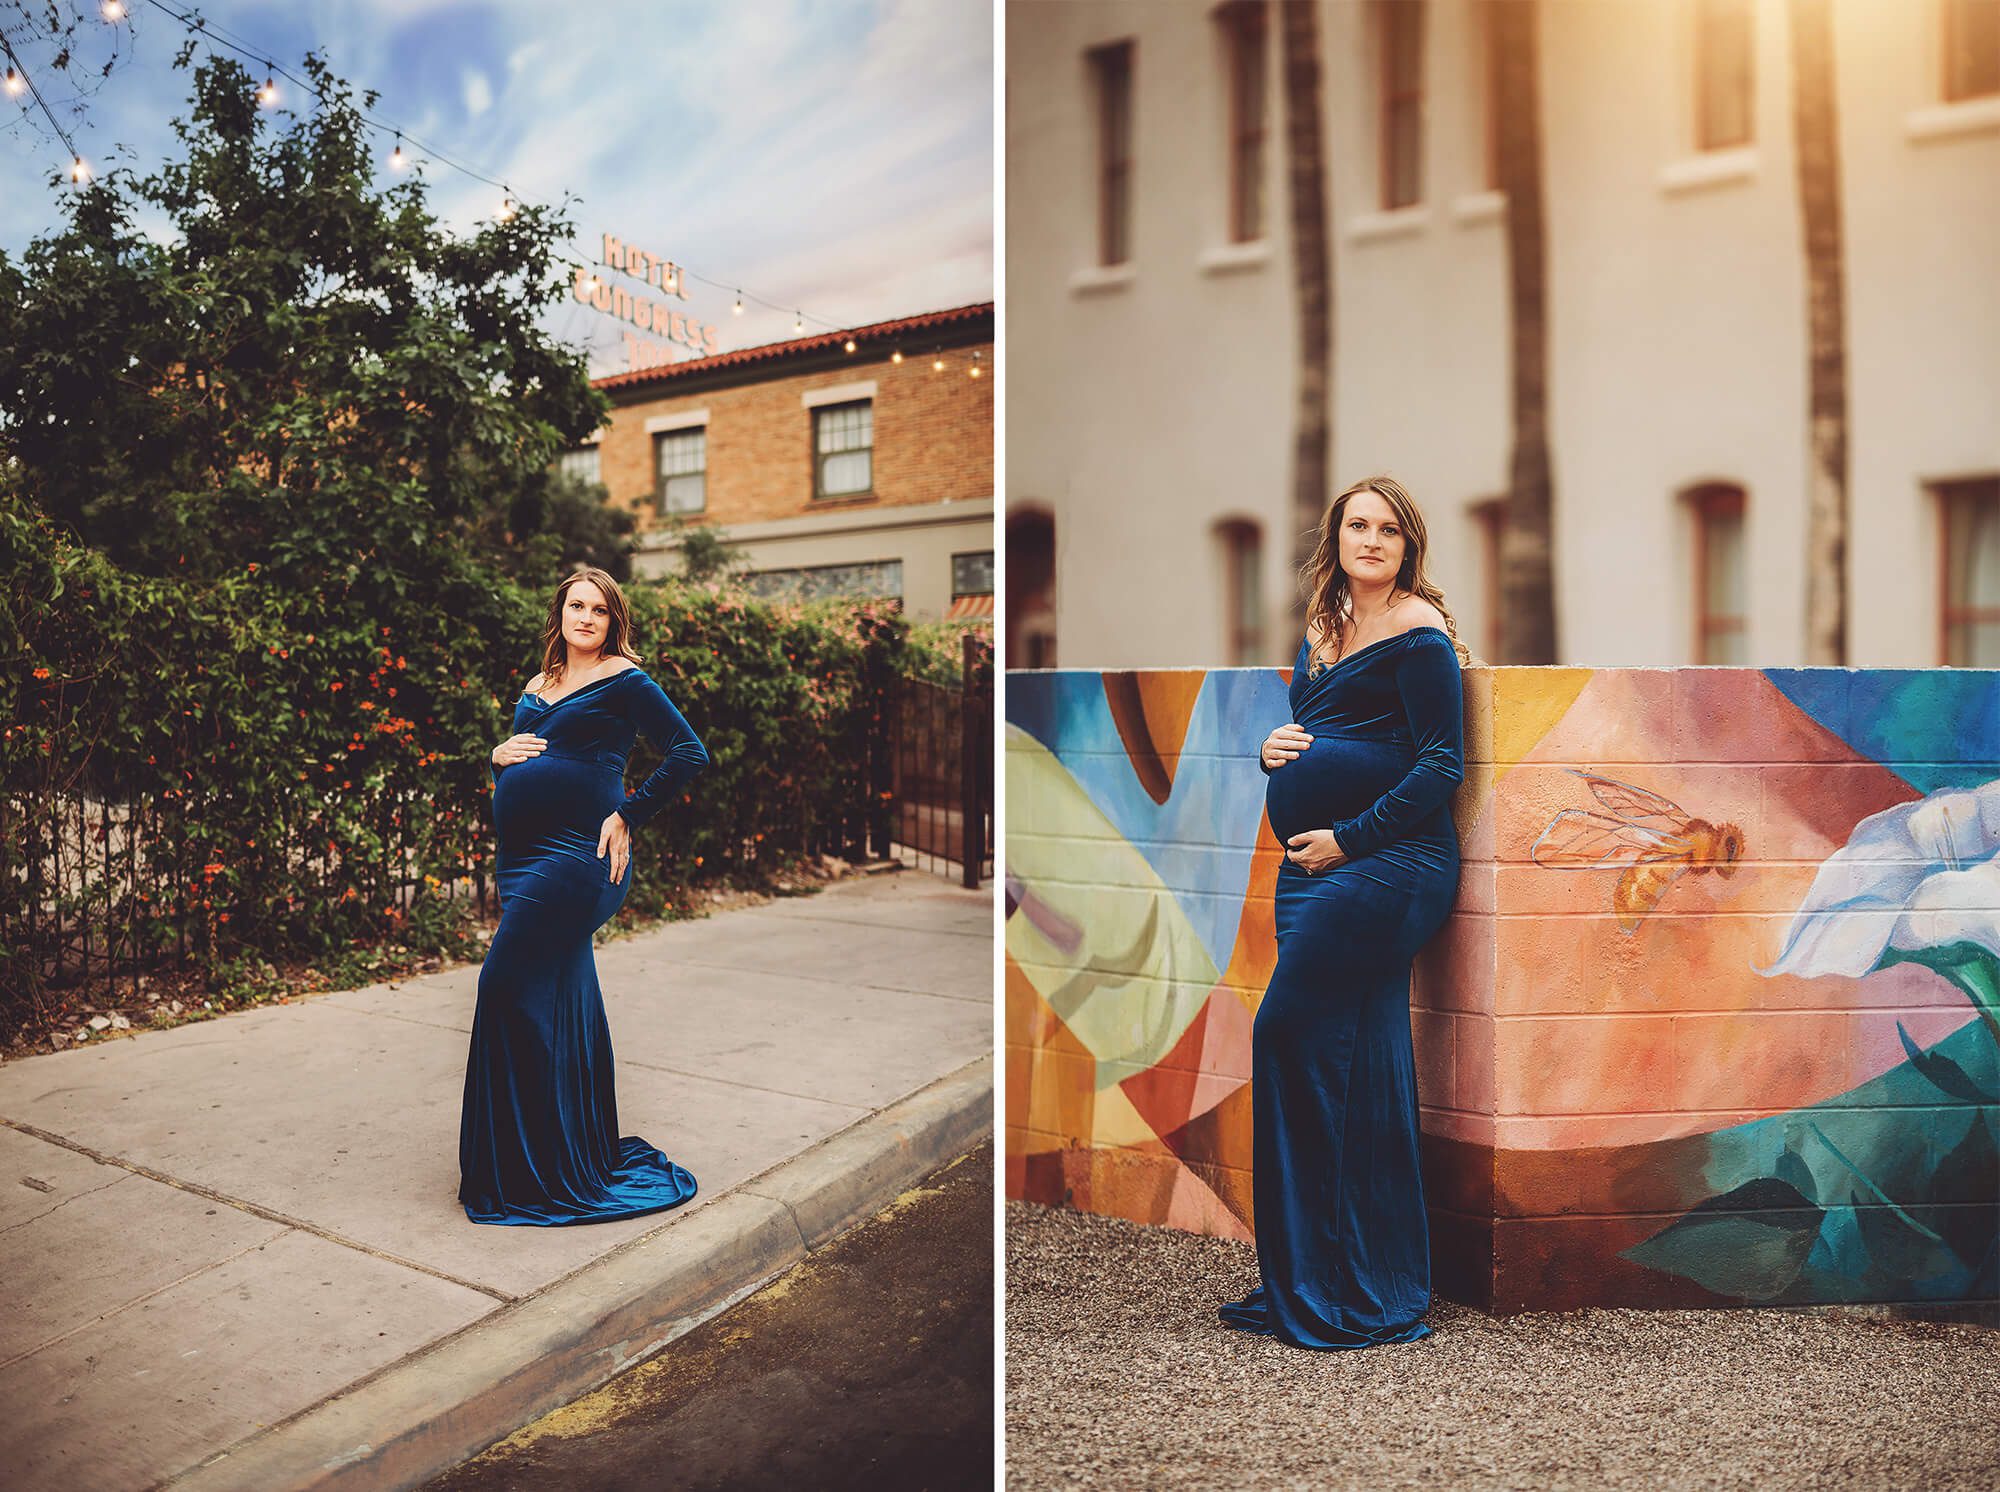 An urban maternity session in downtown Tucson with Hotel Congress and an art wall